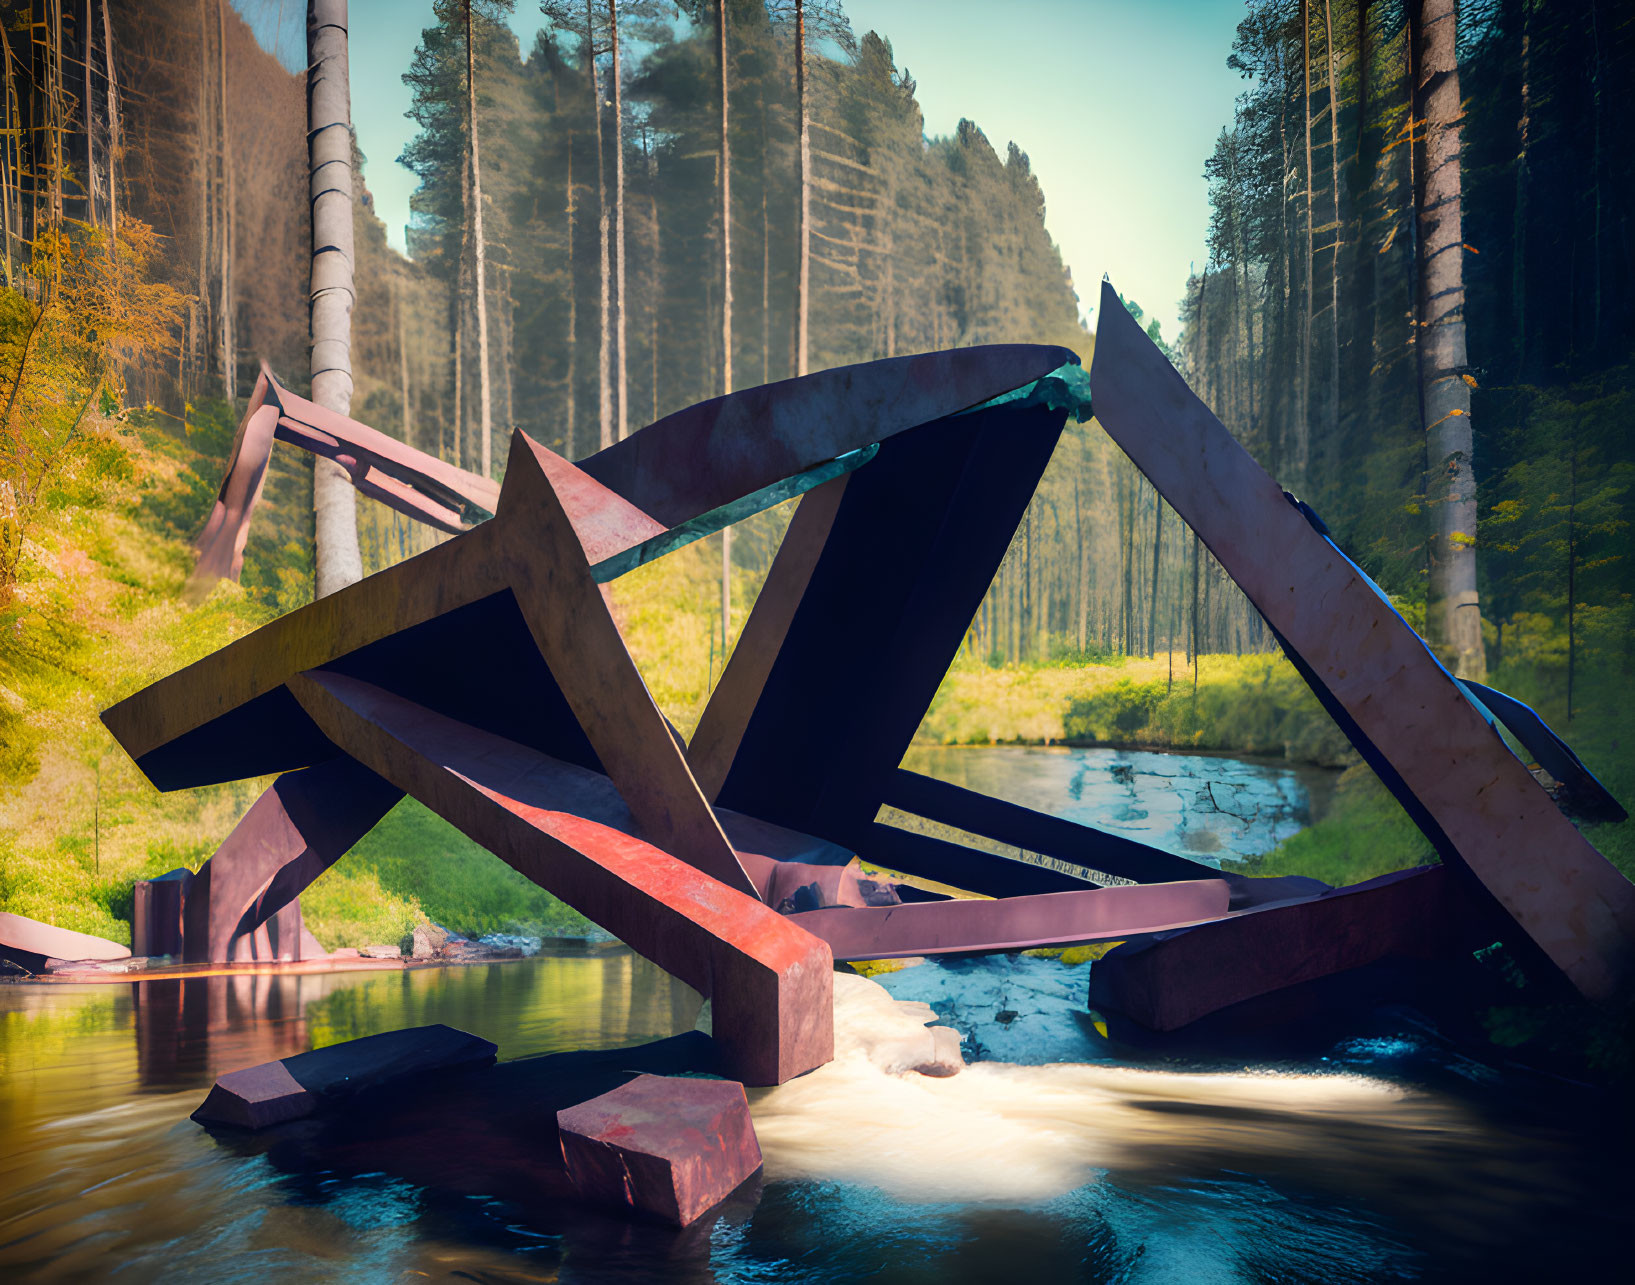 Angular metal bridge over tranquil river in forested area